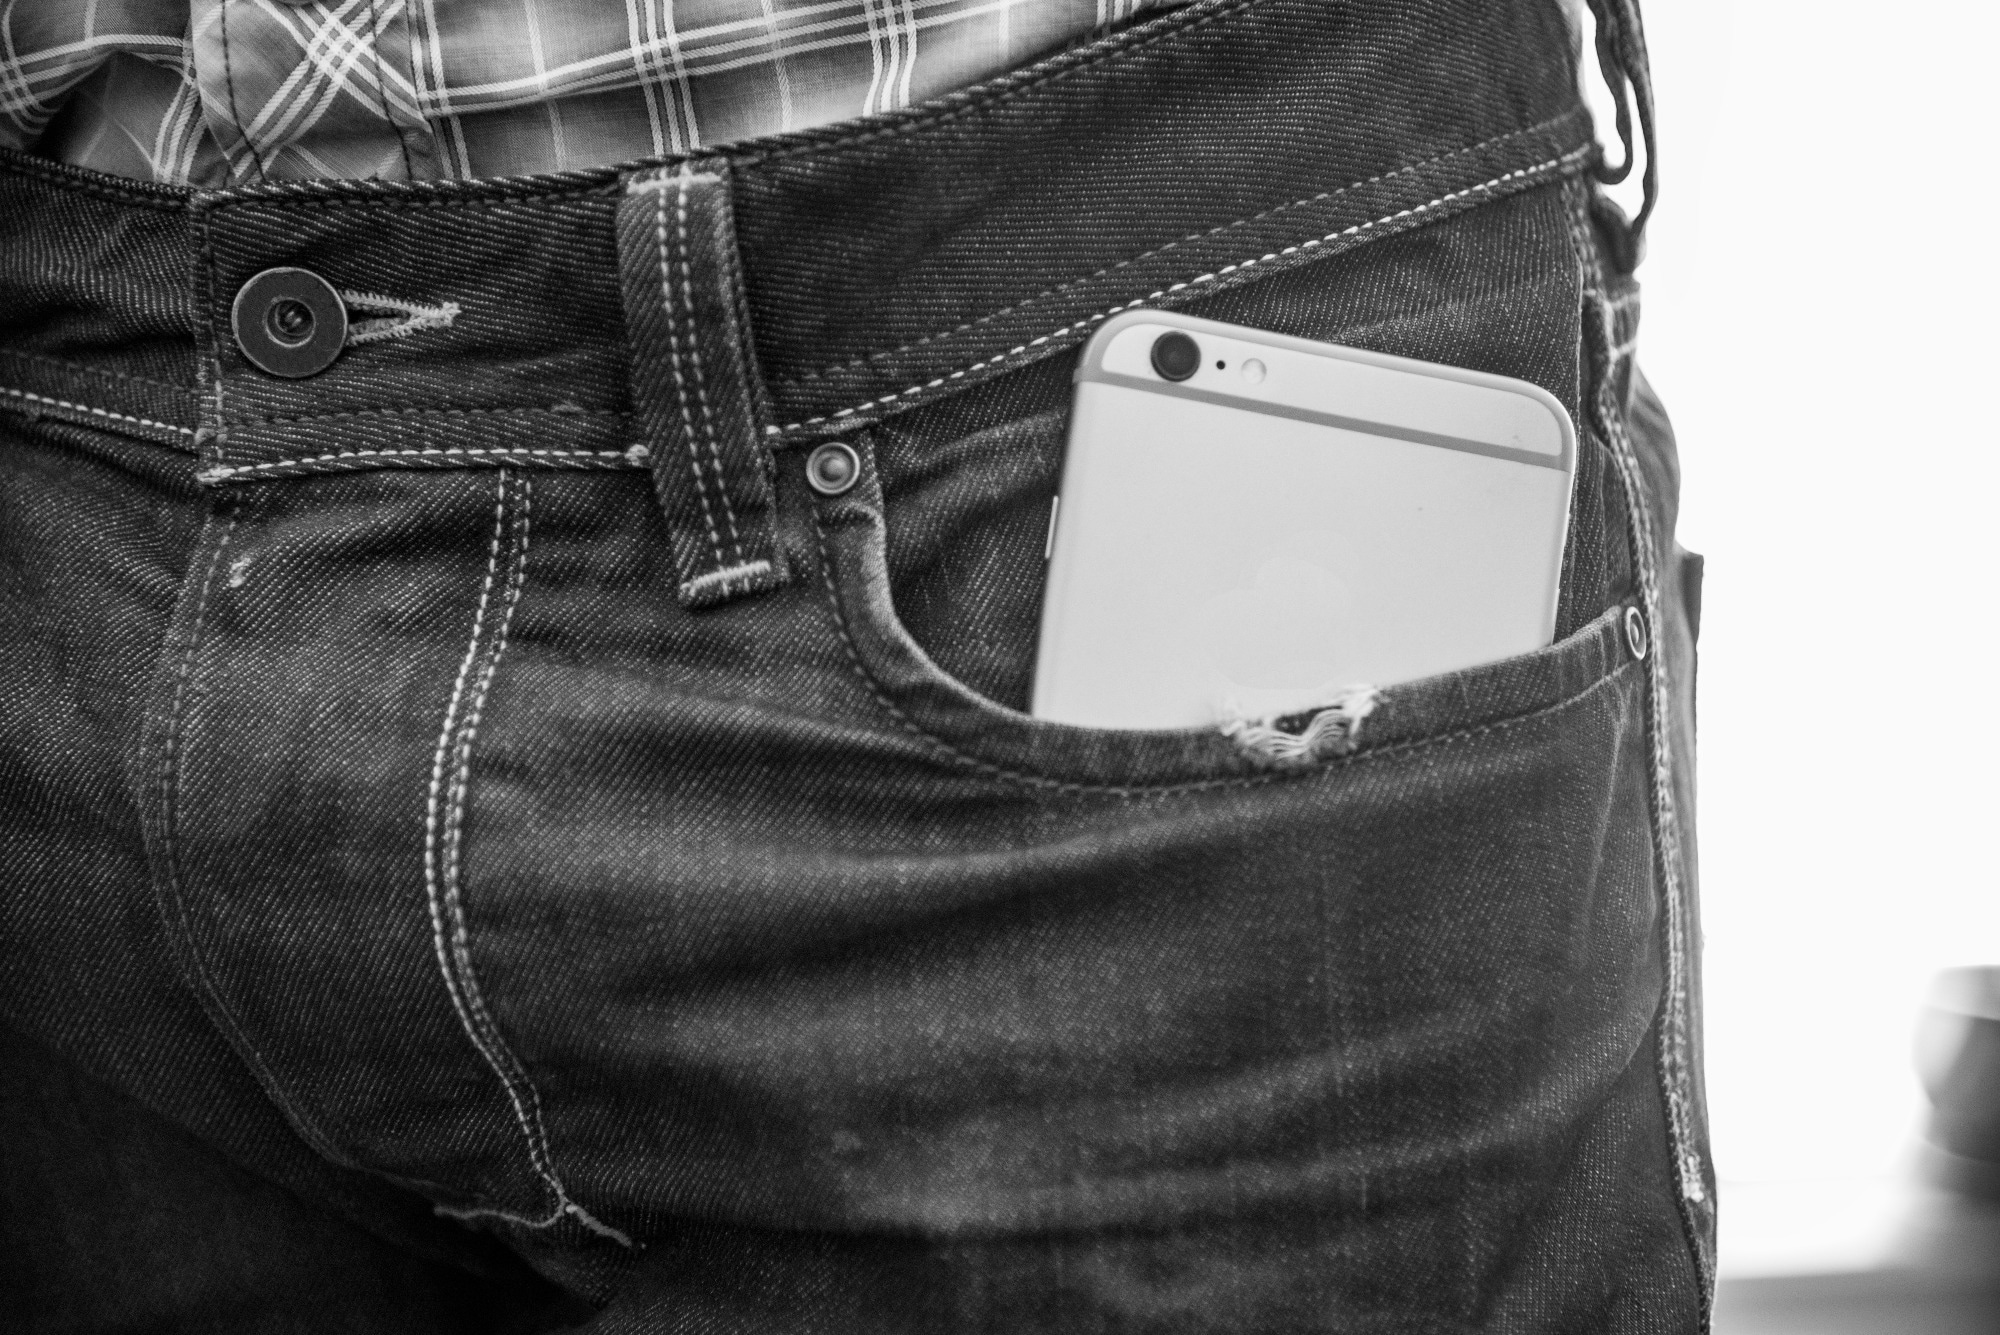 Study: Association between self-reported mobile phone use and the semen quality of young men. Image Credit: SeaRick1 / Shutterstock